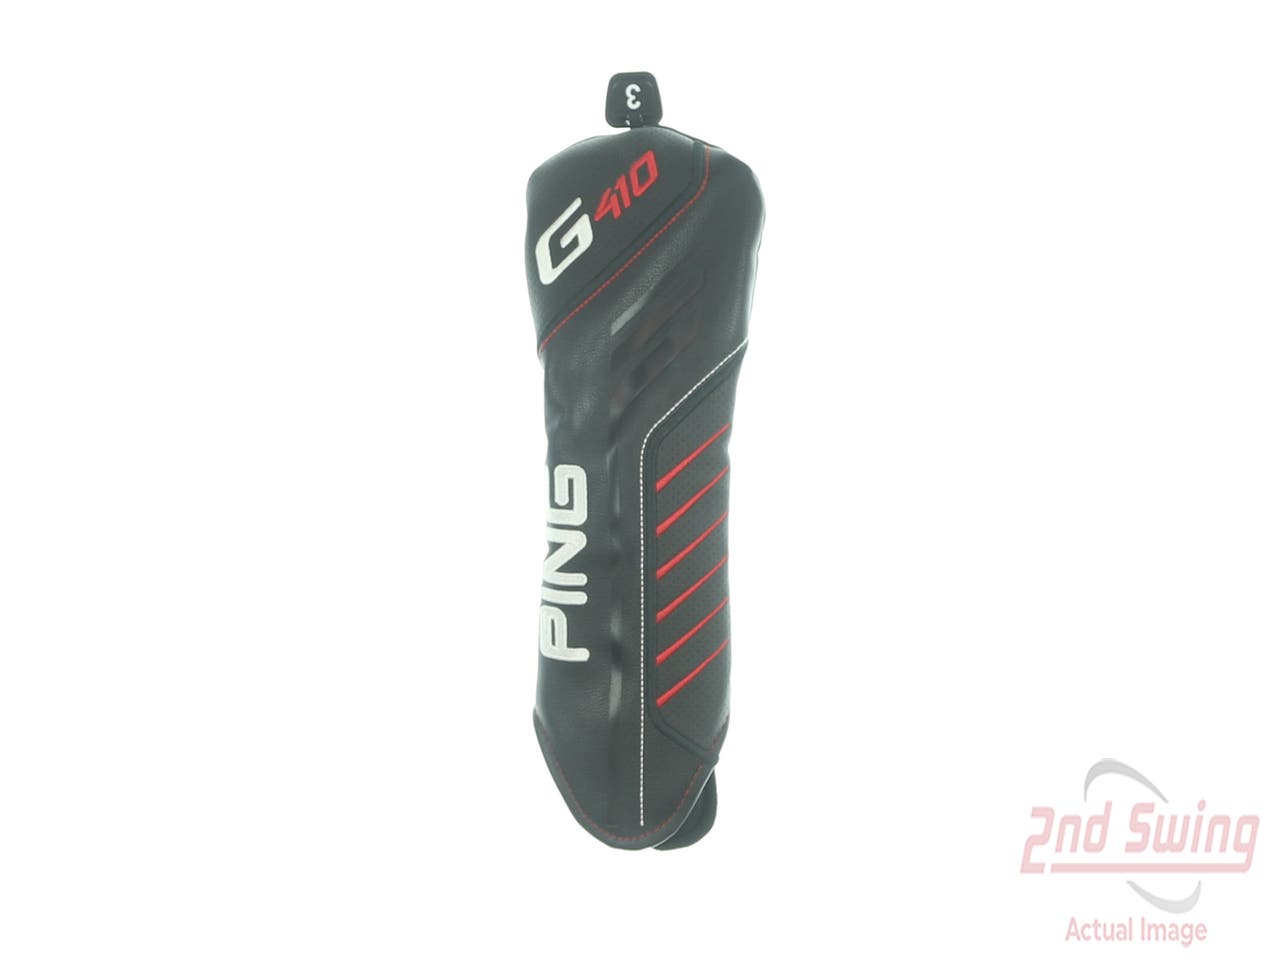 Ping G410 3 Wood Fairway Headcover Black and Red with Tag